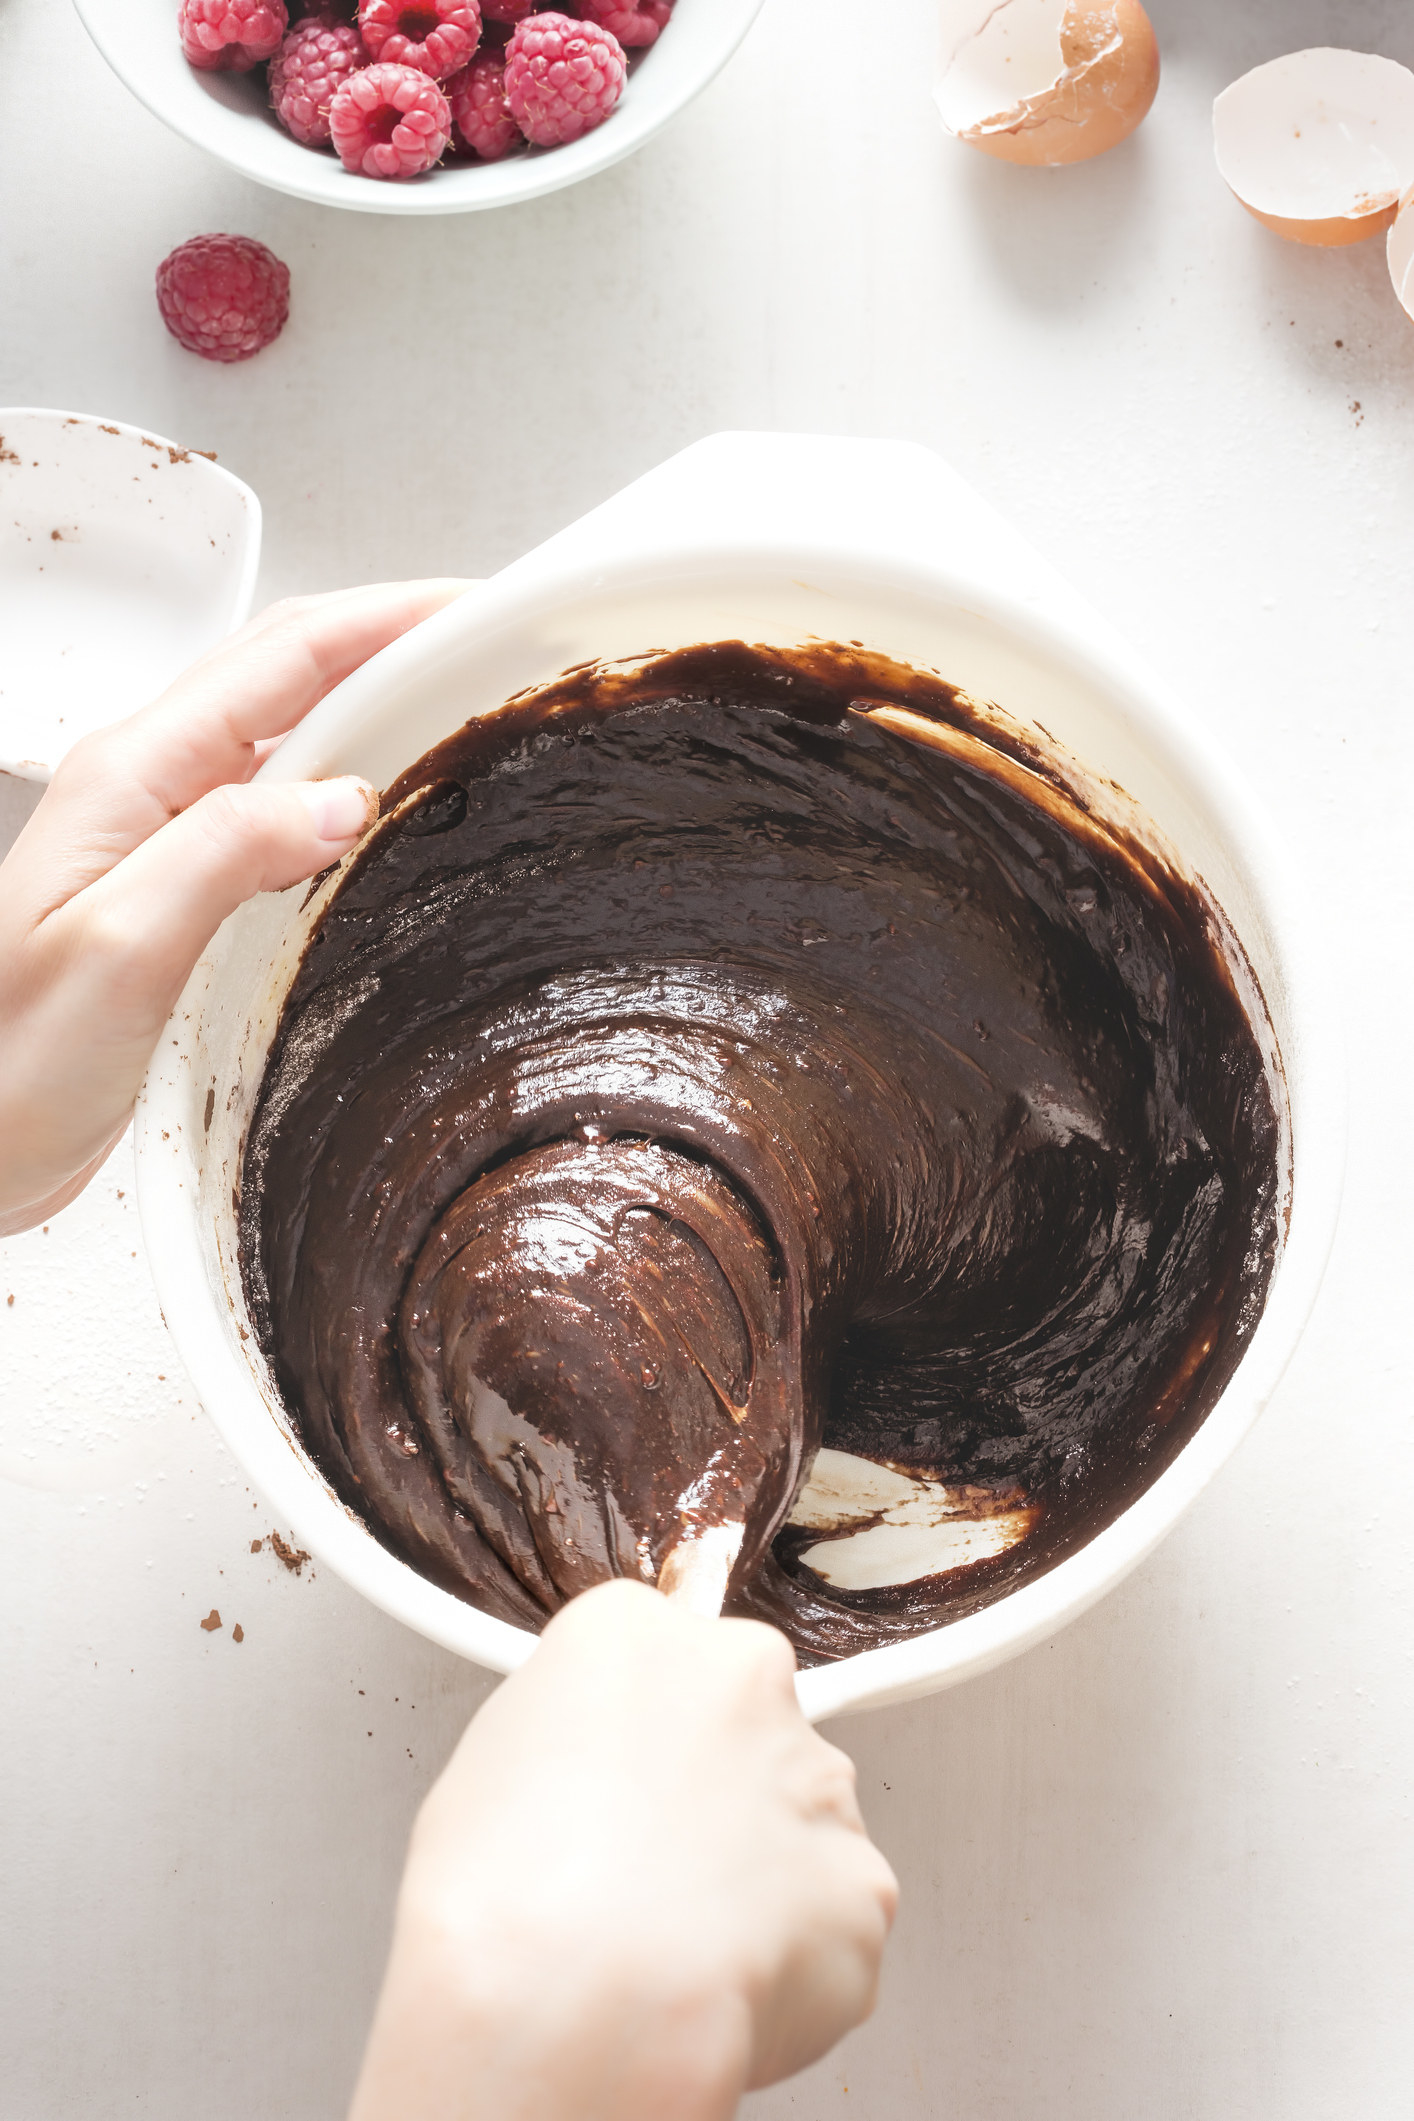 Mixing chocolate brownie batter in a bowl by hand